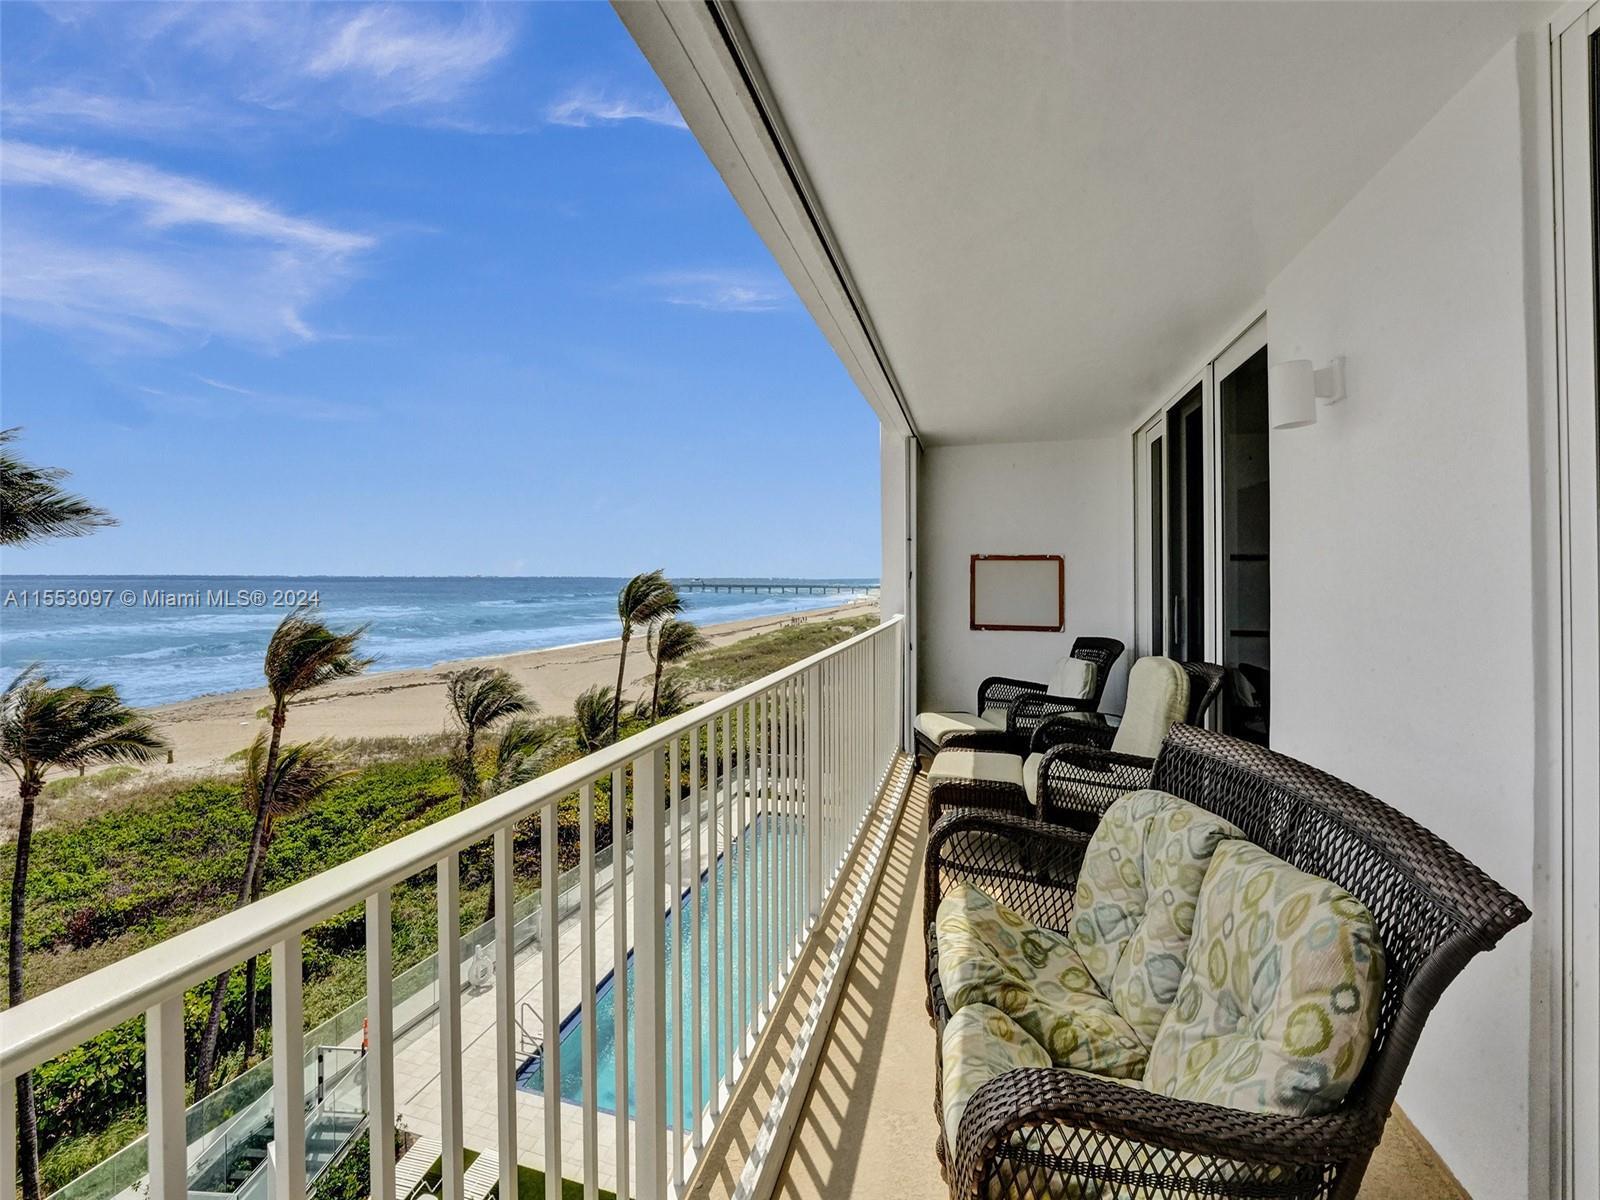 GORGEOUS, OCEAN FRONT PROPERTY WITH DIRECT ACCESS TO THE BEACH. RESORT STYLE POOL SITTING ON THE BOC